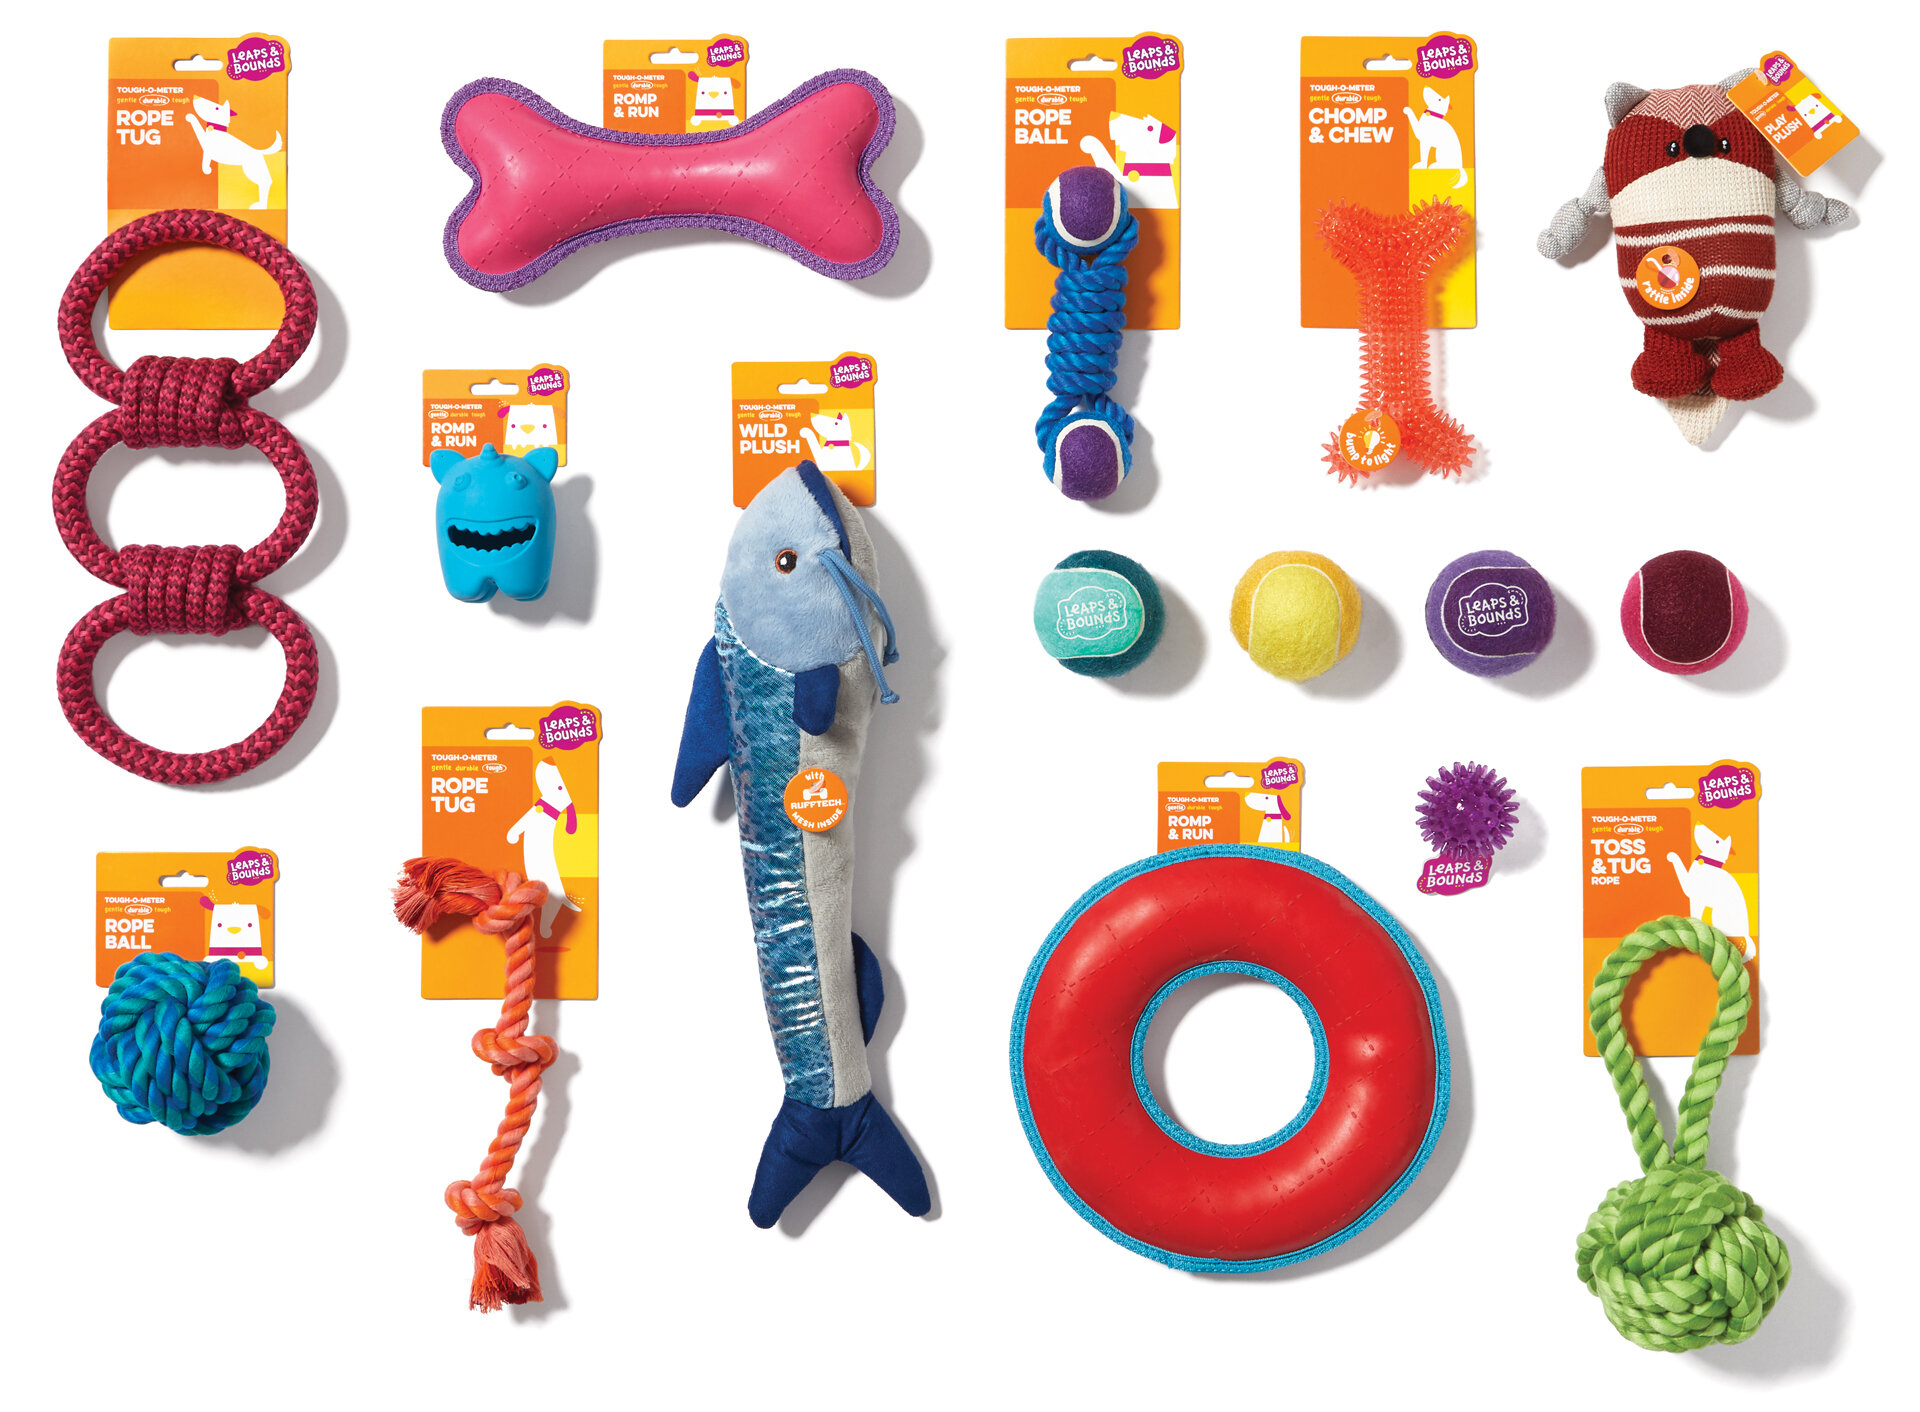 Leaps & Bounds Tube Treat Dog Toy, Small